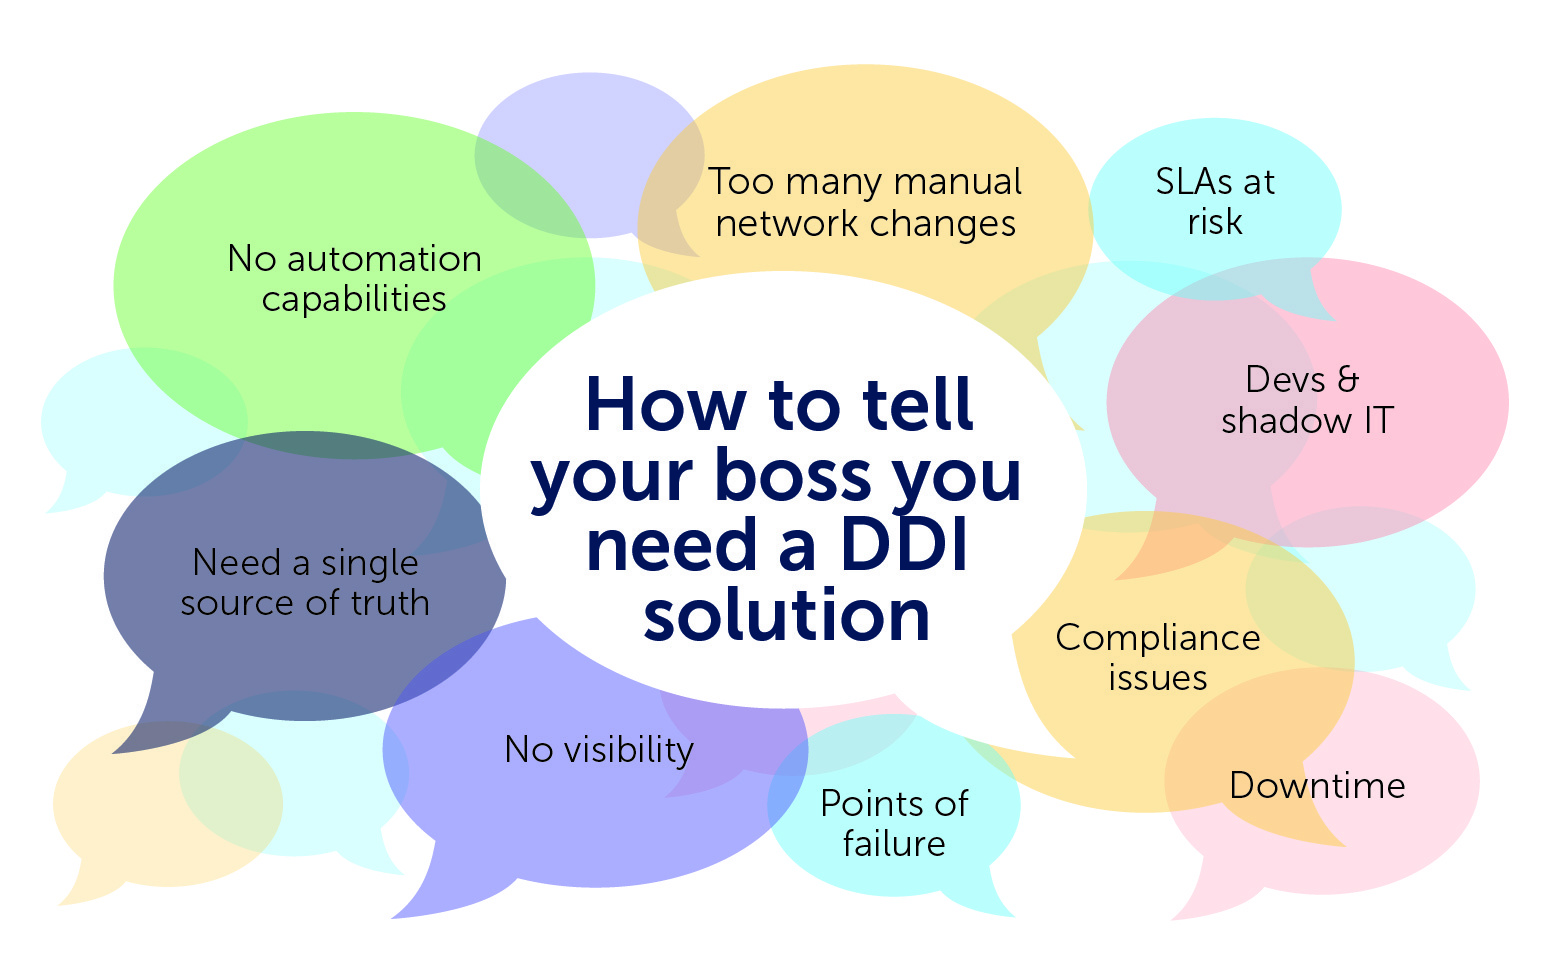 Thought bubbles for how to talk to your boss about buying a DDI solution